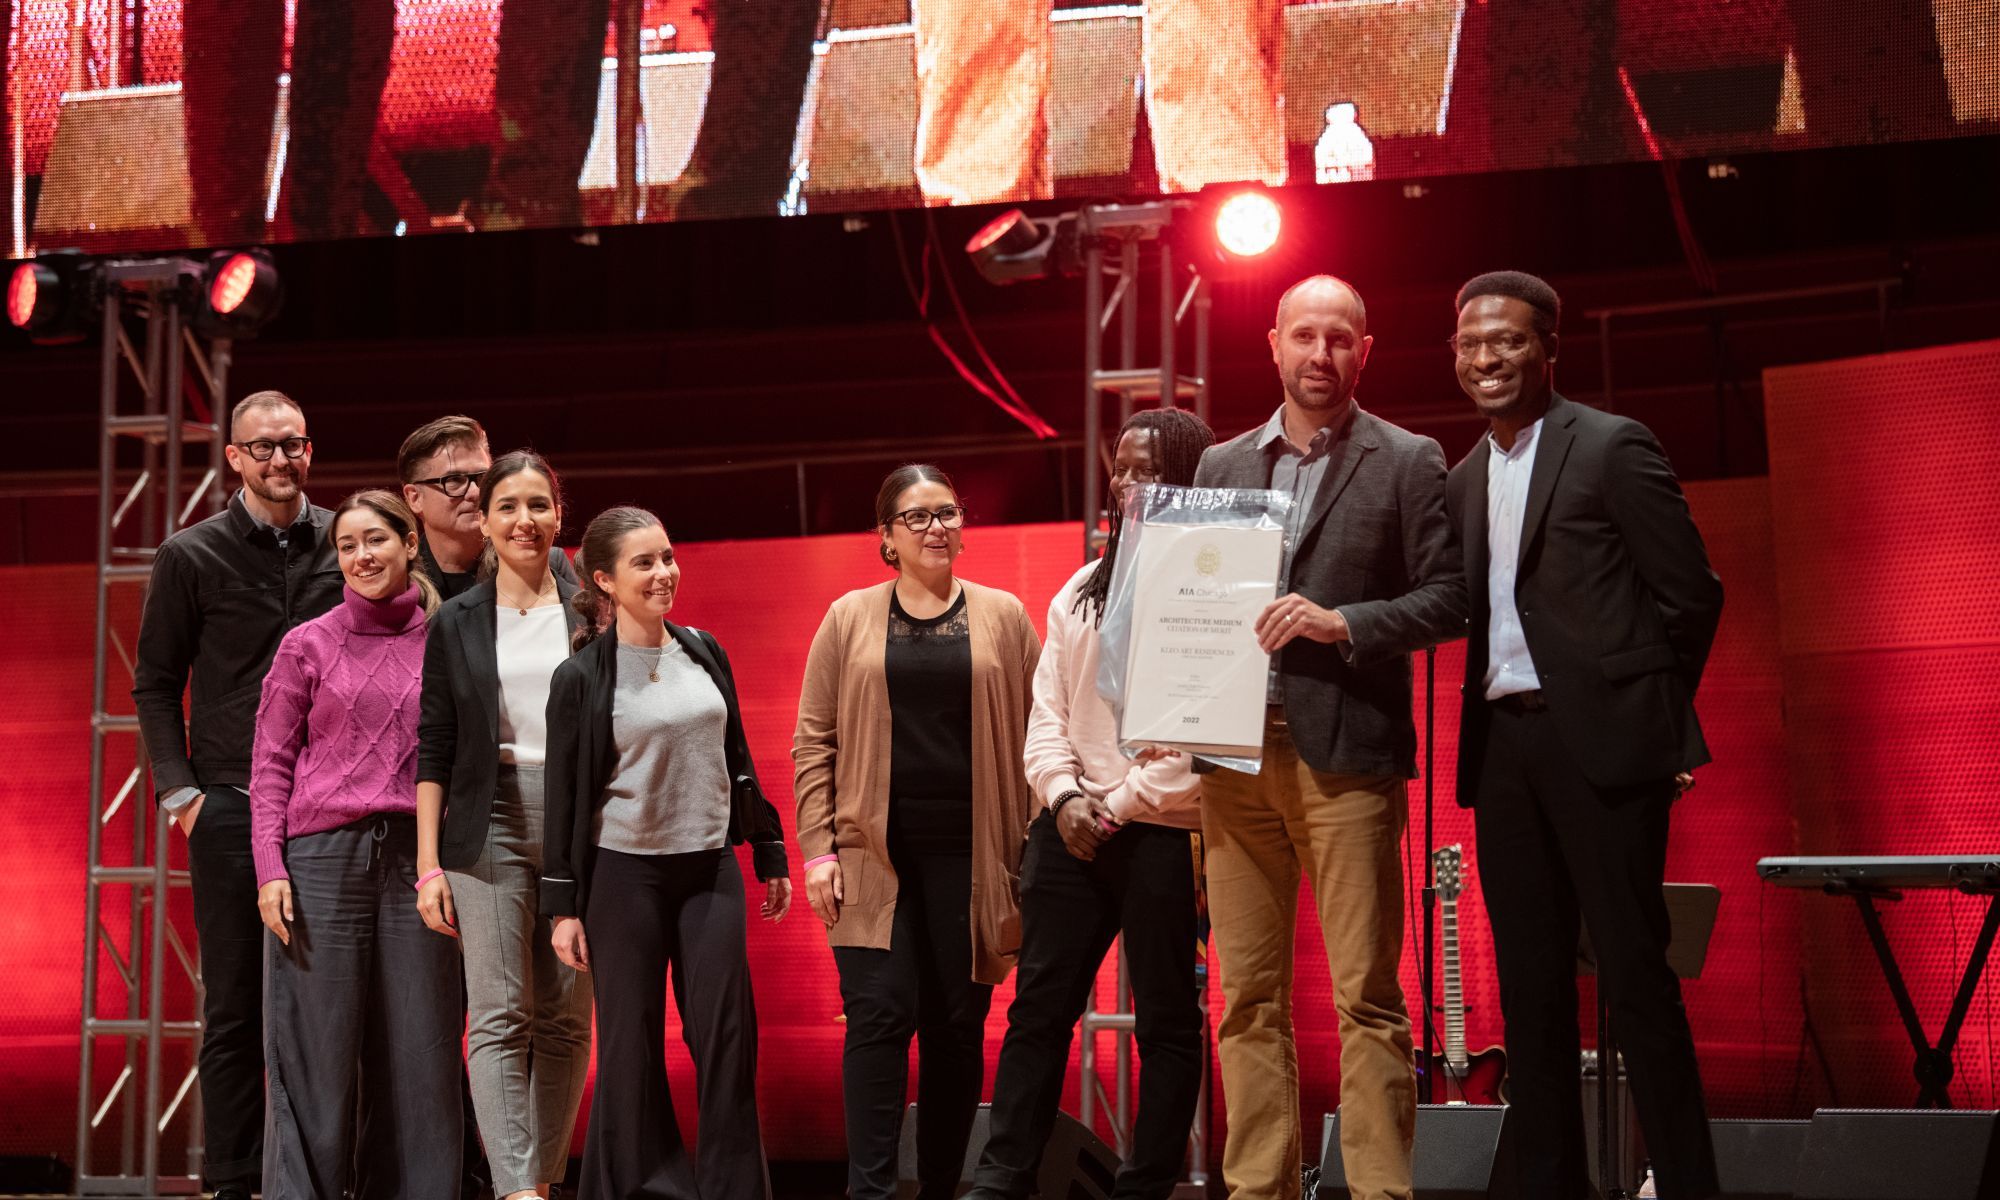 Image of a group of people on stage celebrating receiving their award.